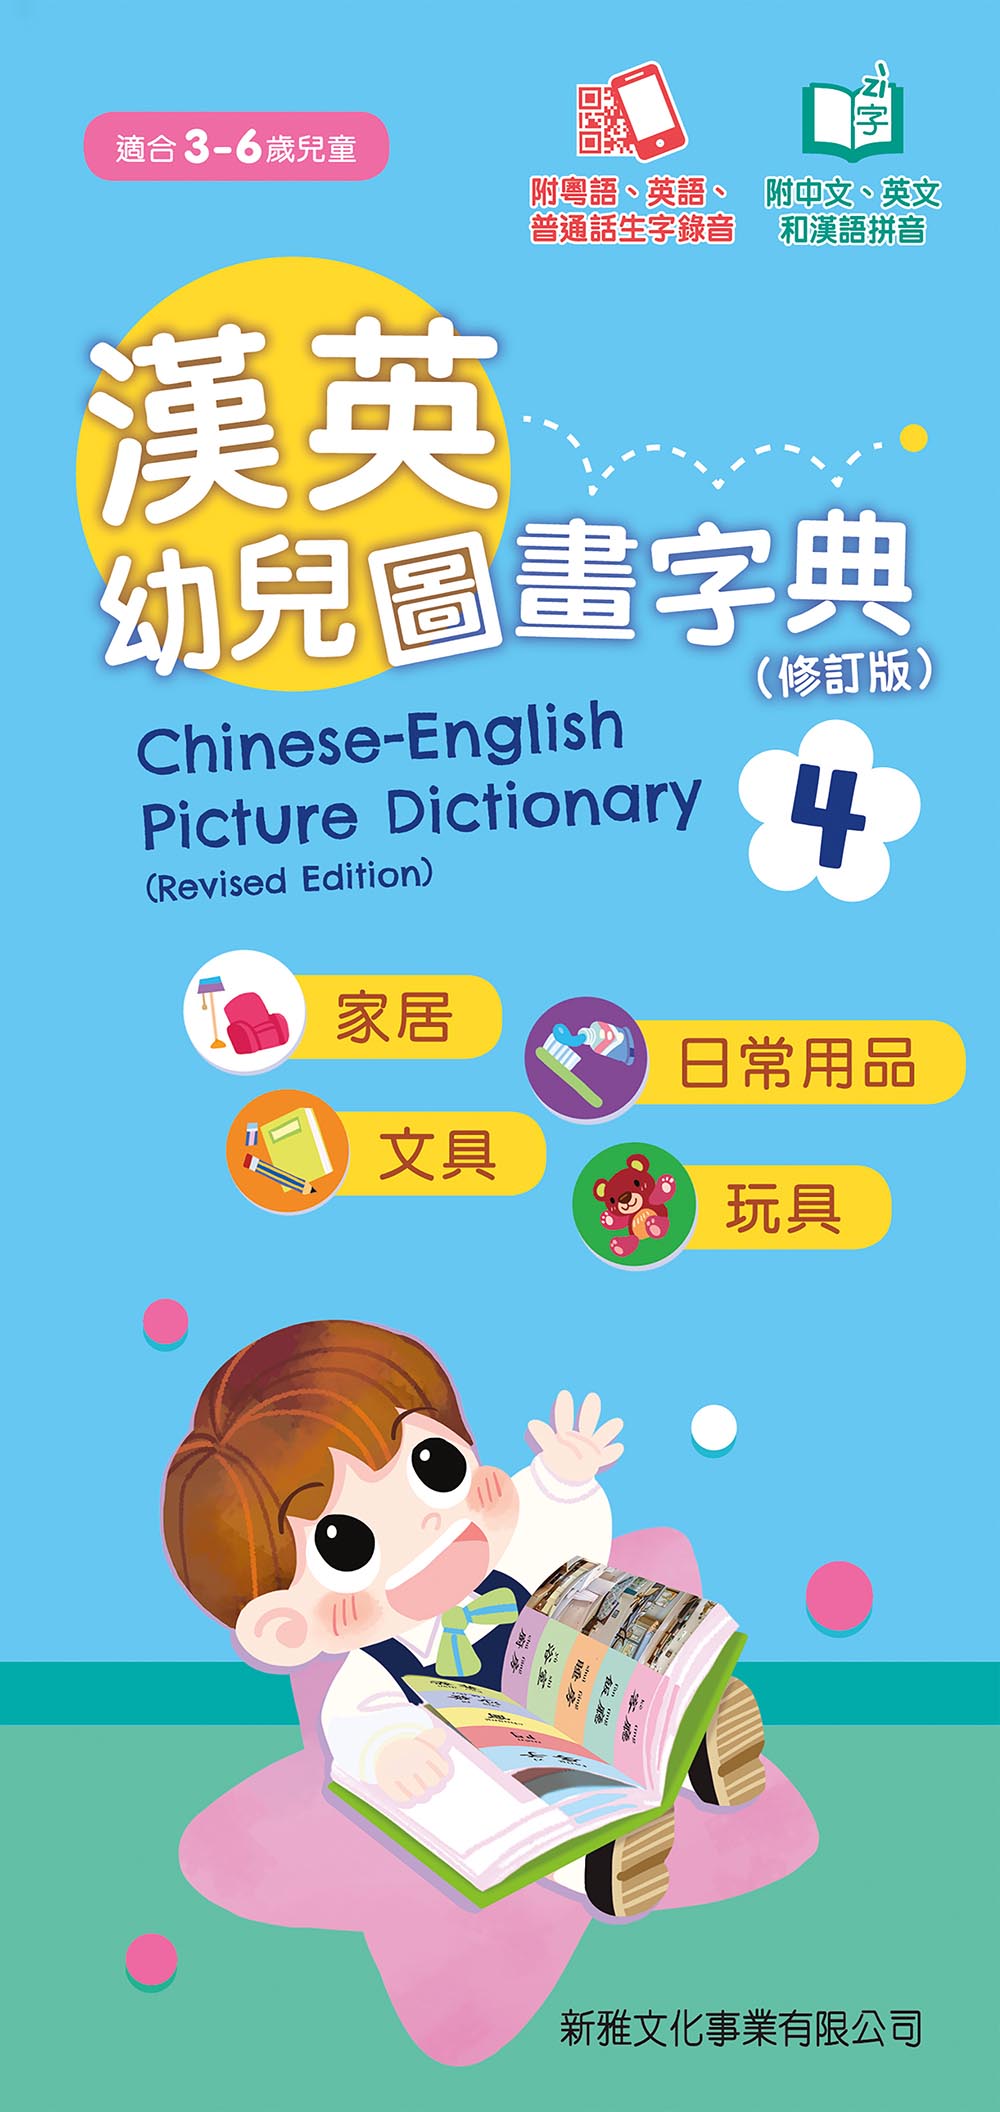 Chinese-English Picture Dictionary for Children #4 (Audio in Cantonese, Mandarin, and English - QR Code) • 漢英幼兒圖畫字典4 (修訂版)  (QR Code)